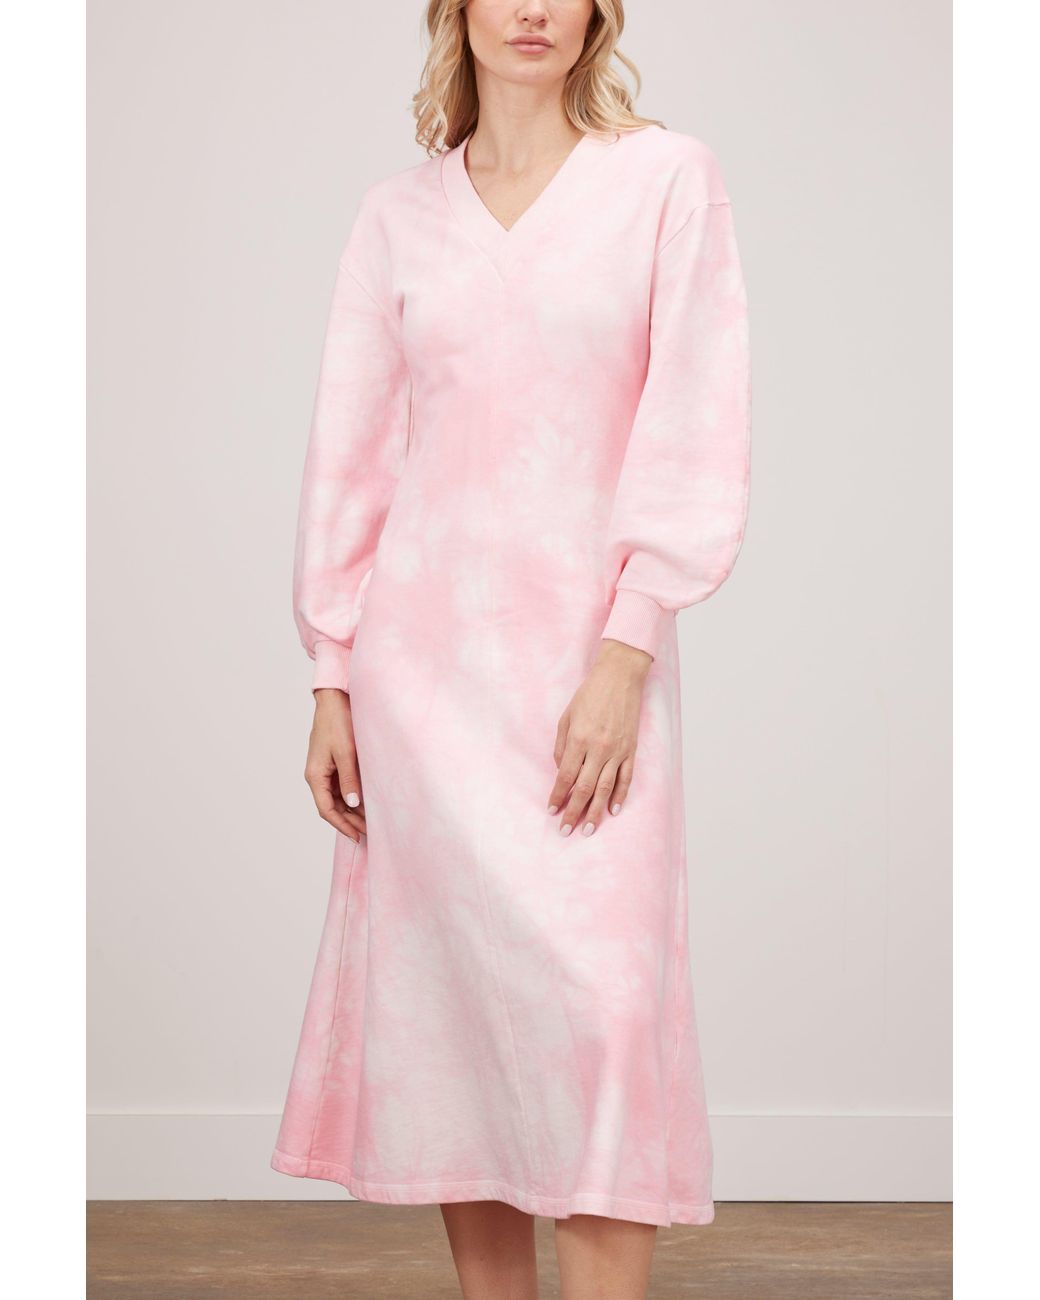 Rodebjer Giselle Dress in Pink | Lyst Canada